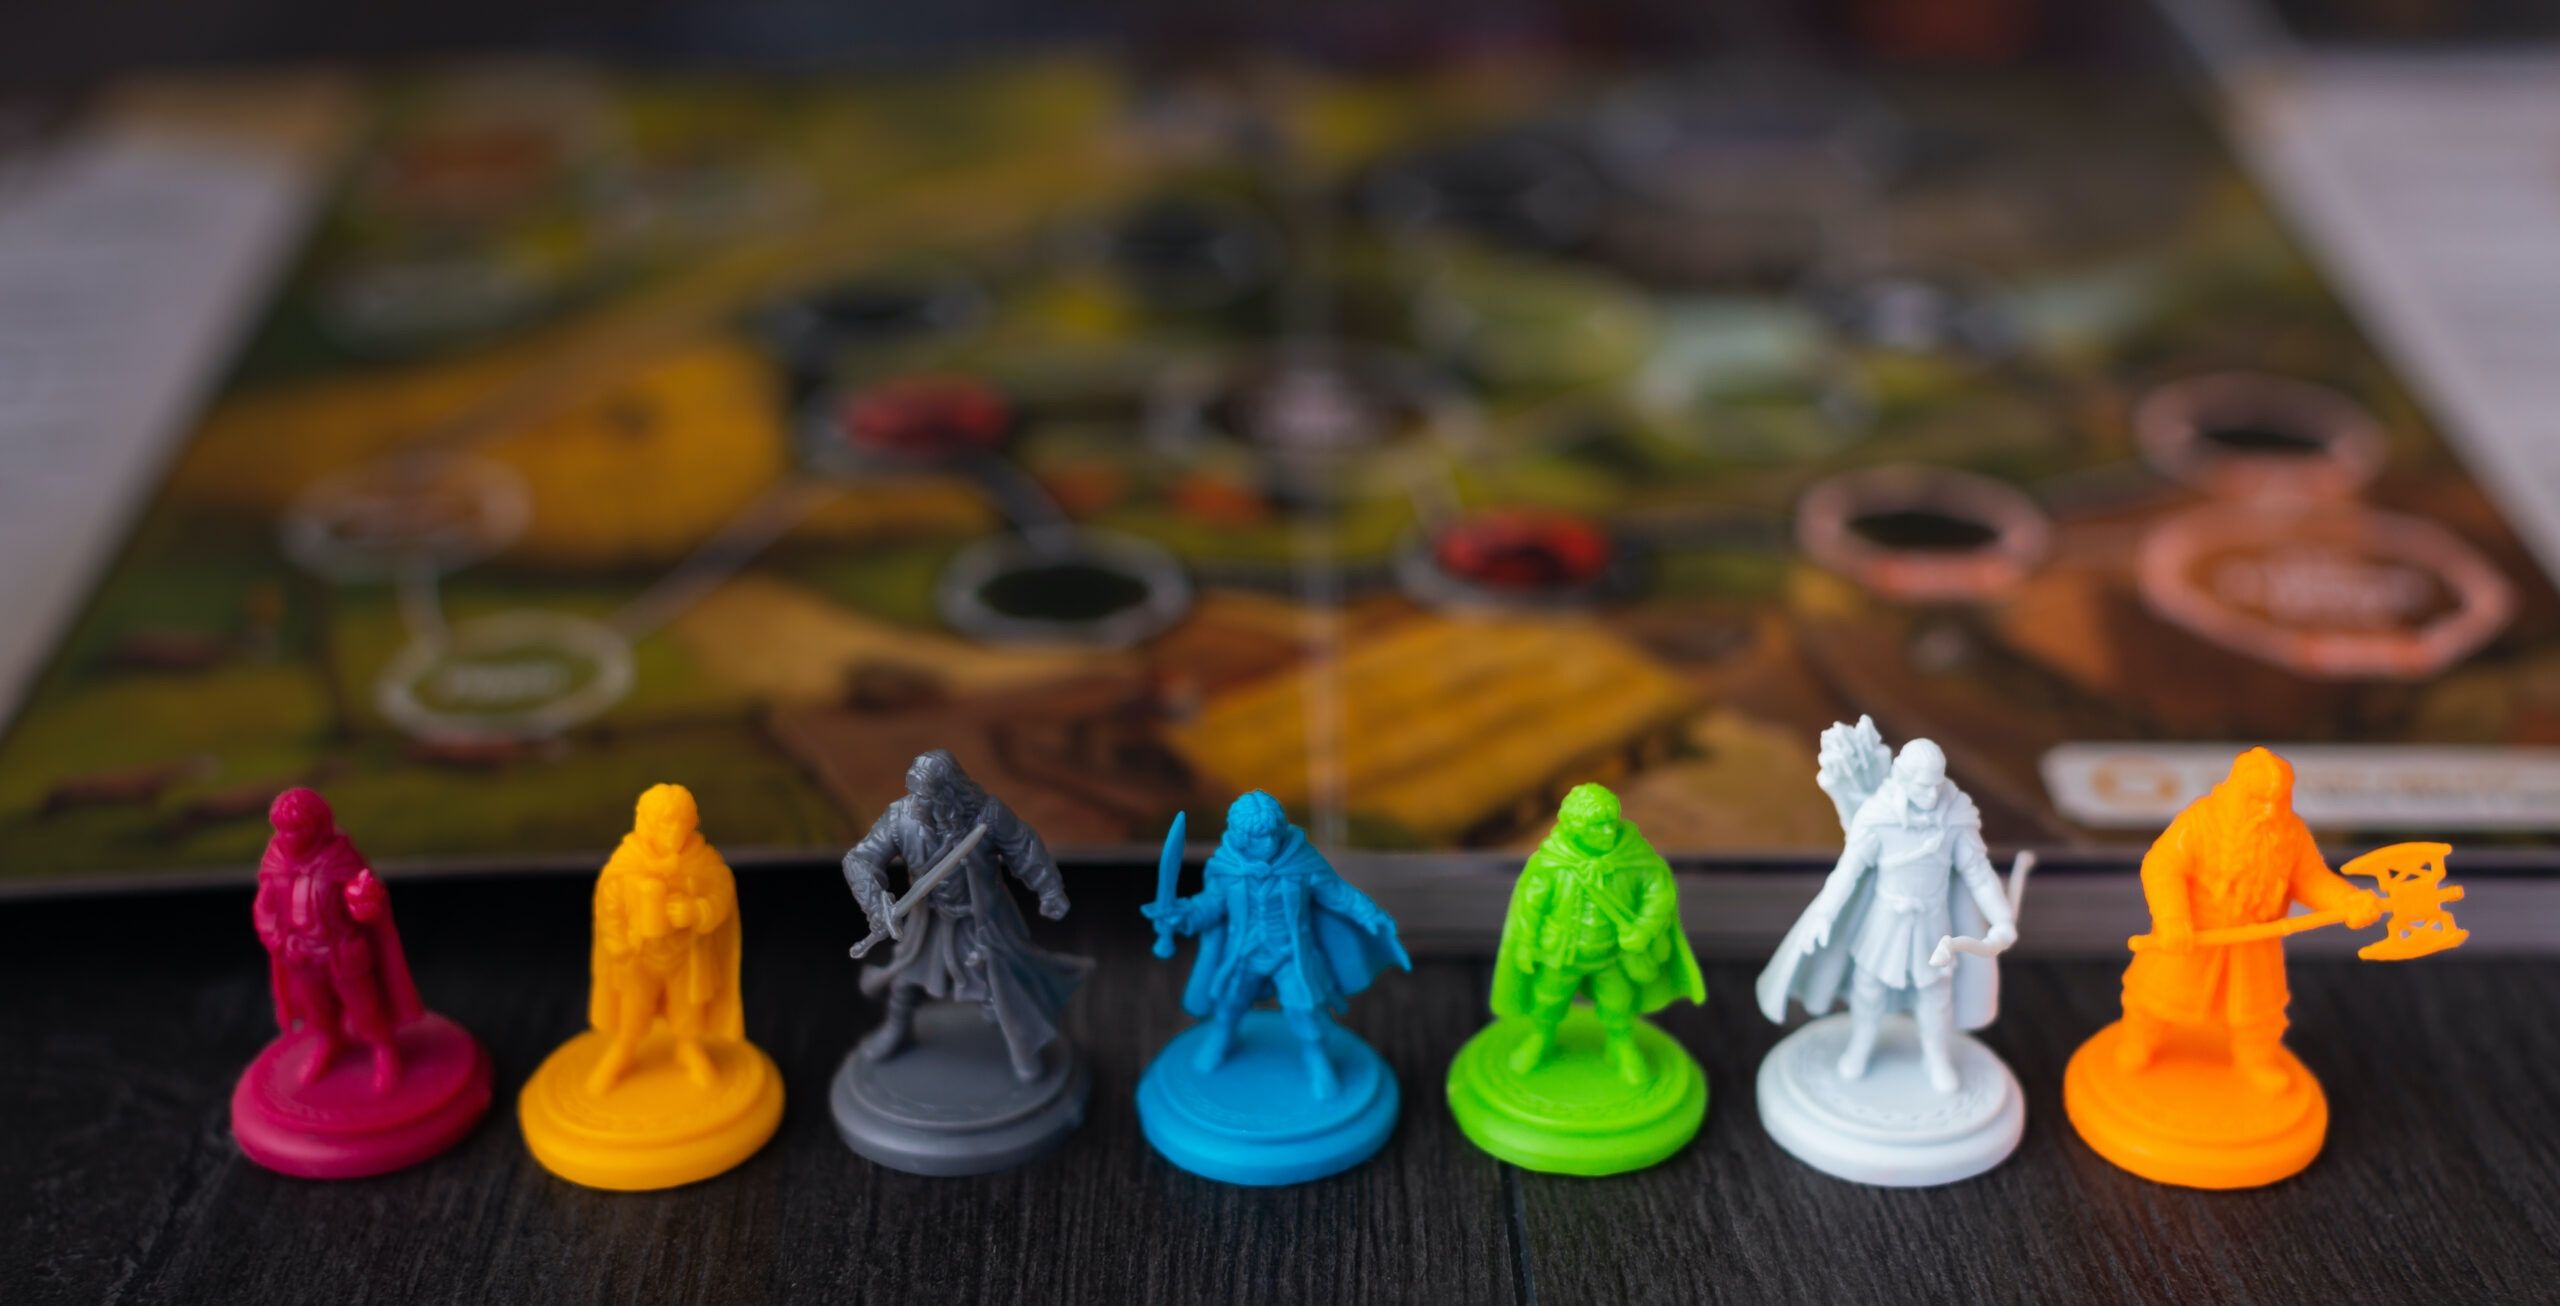 The Lord Of The Rings Adventure Book Game Miniatures - Ravensburger